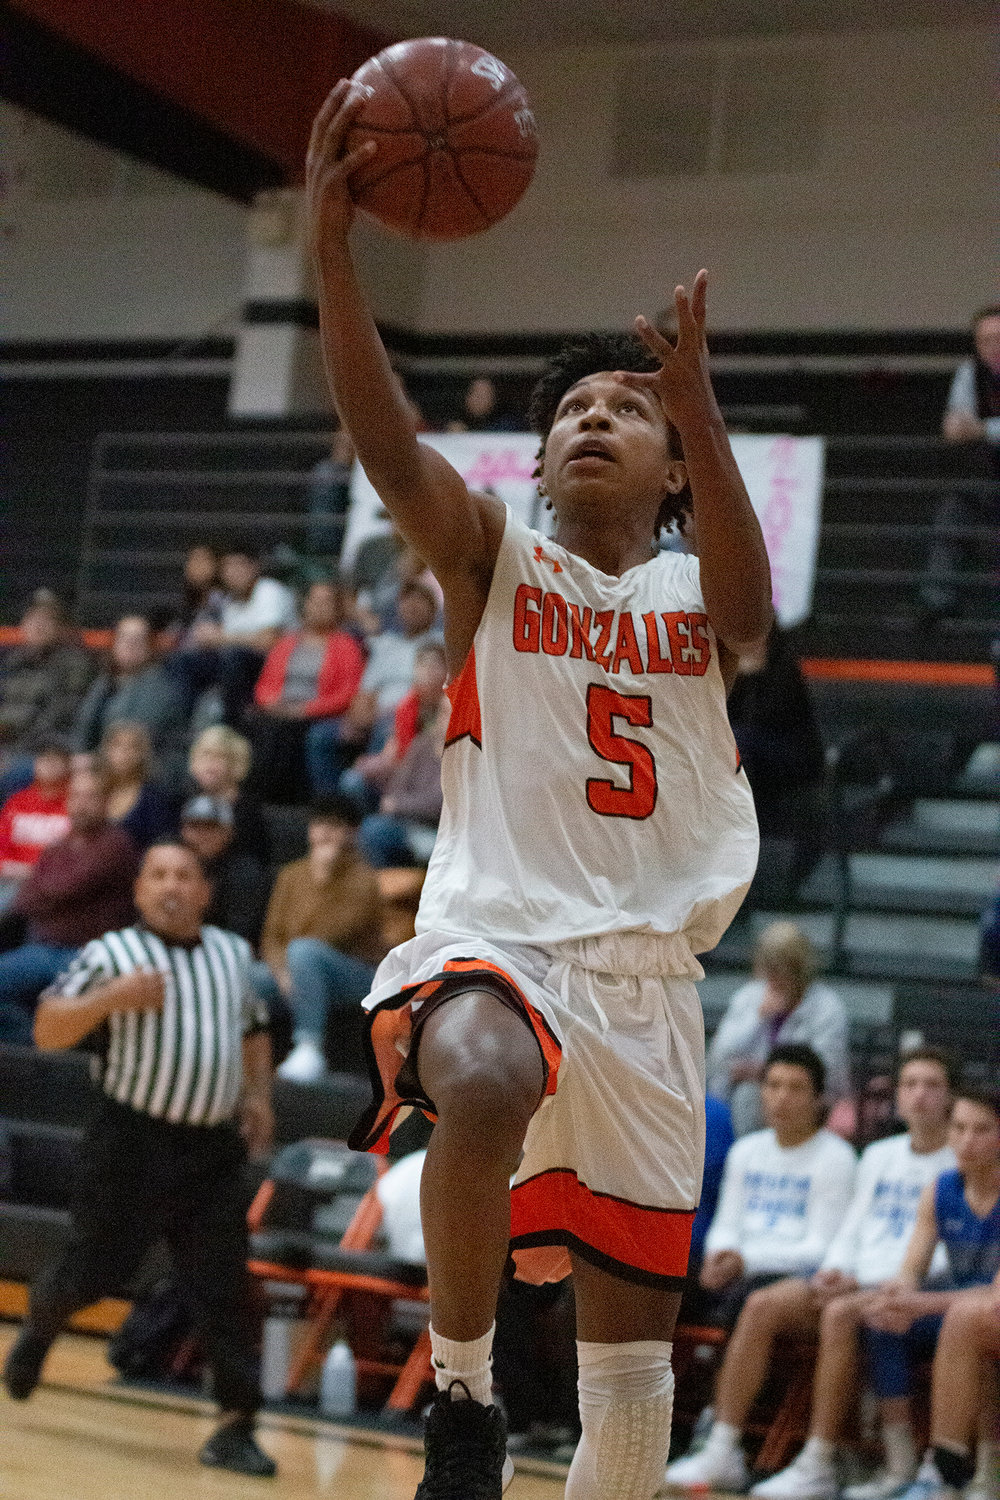 Jaiahius Goode (5) goes up for a lay up. He had seven points Tuesday against Bandera.